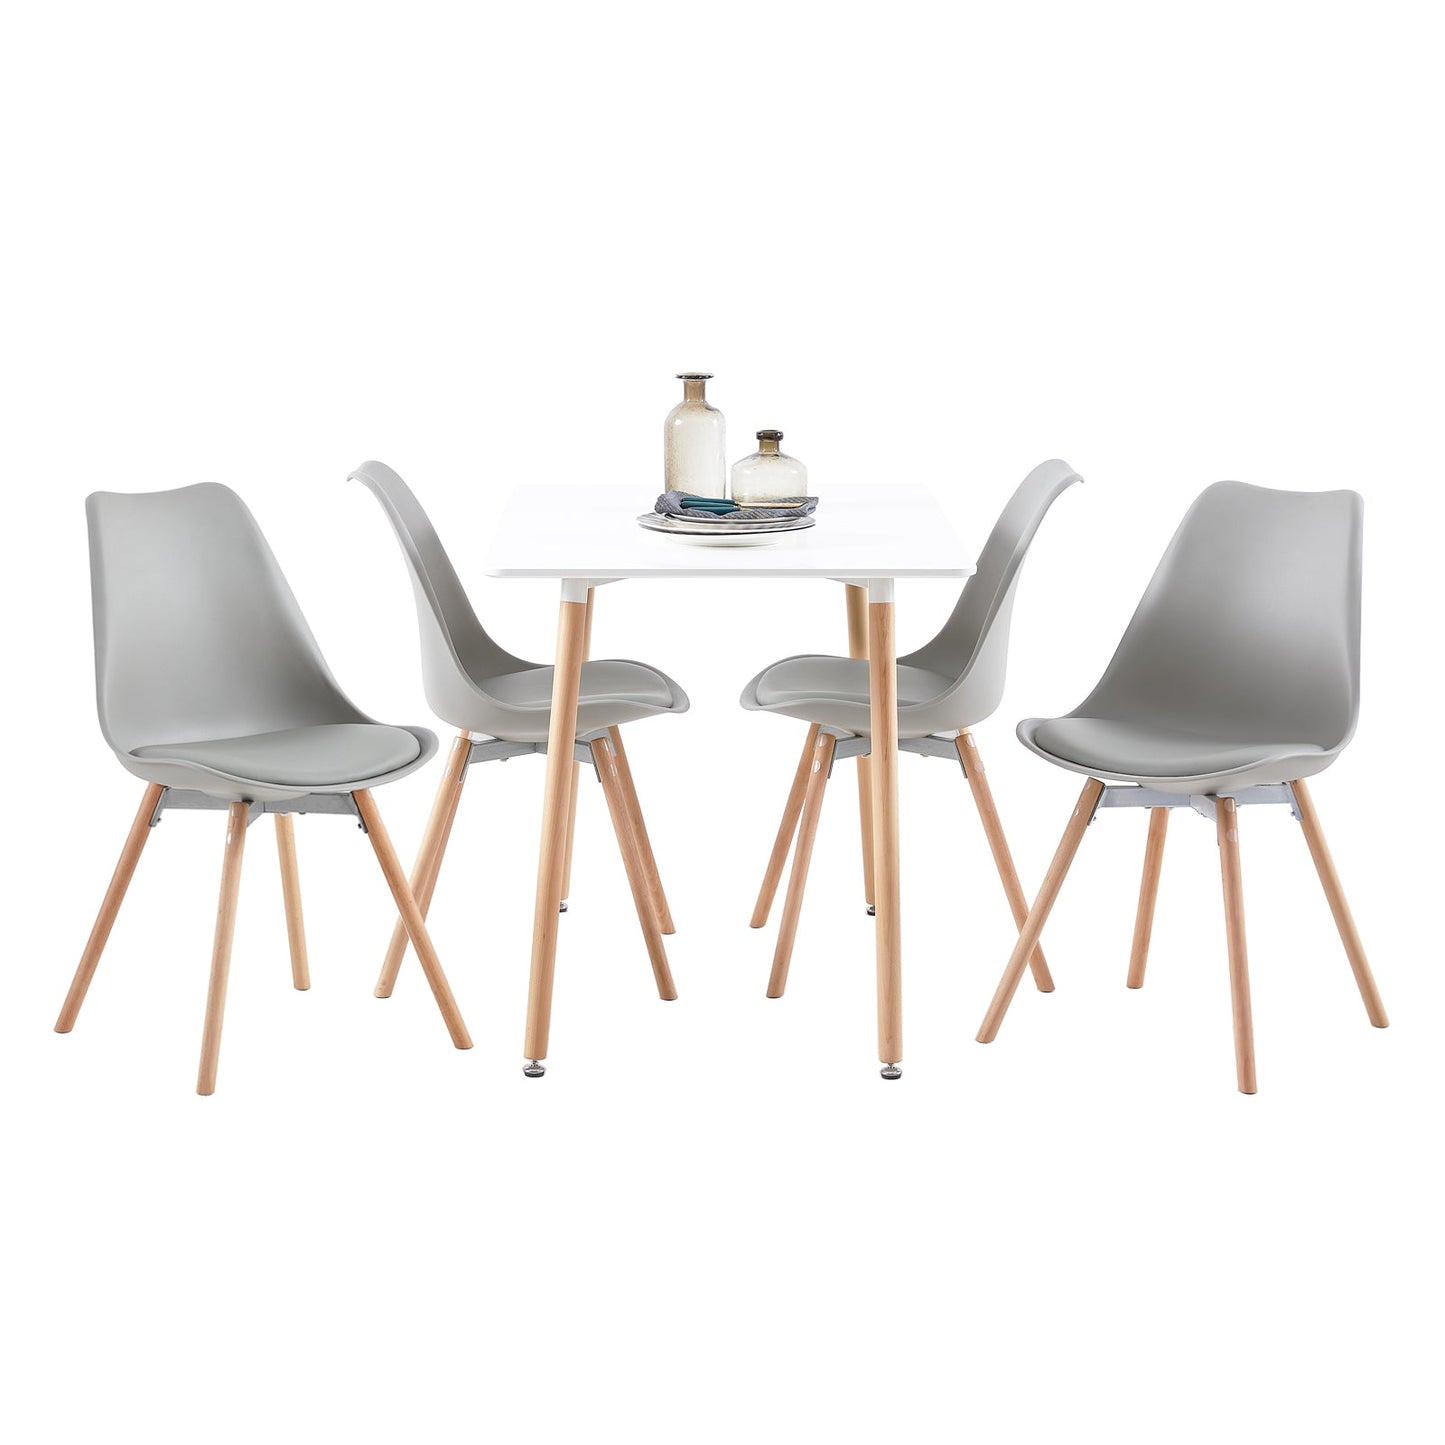 OATS PP Dining Chairs with Beech Legs - Black/White/Grey